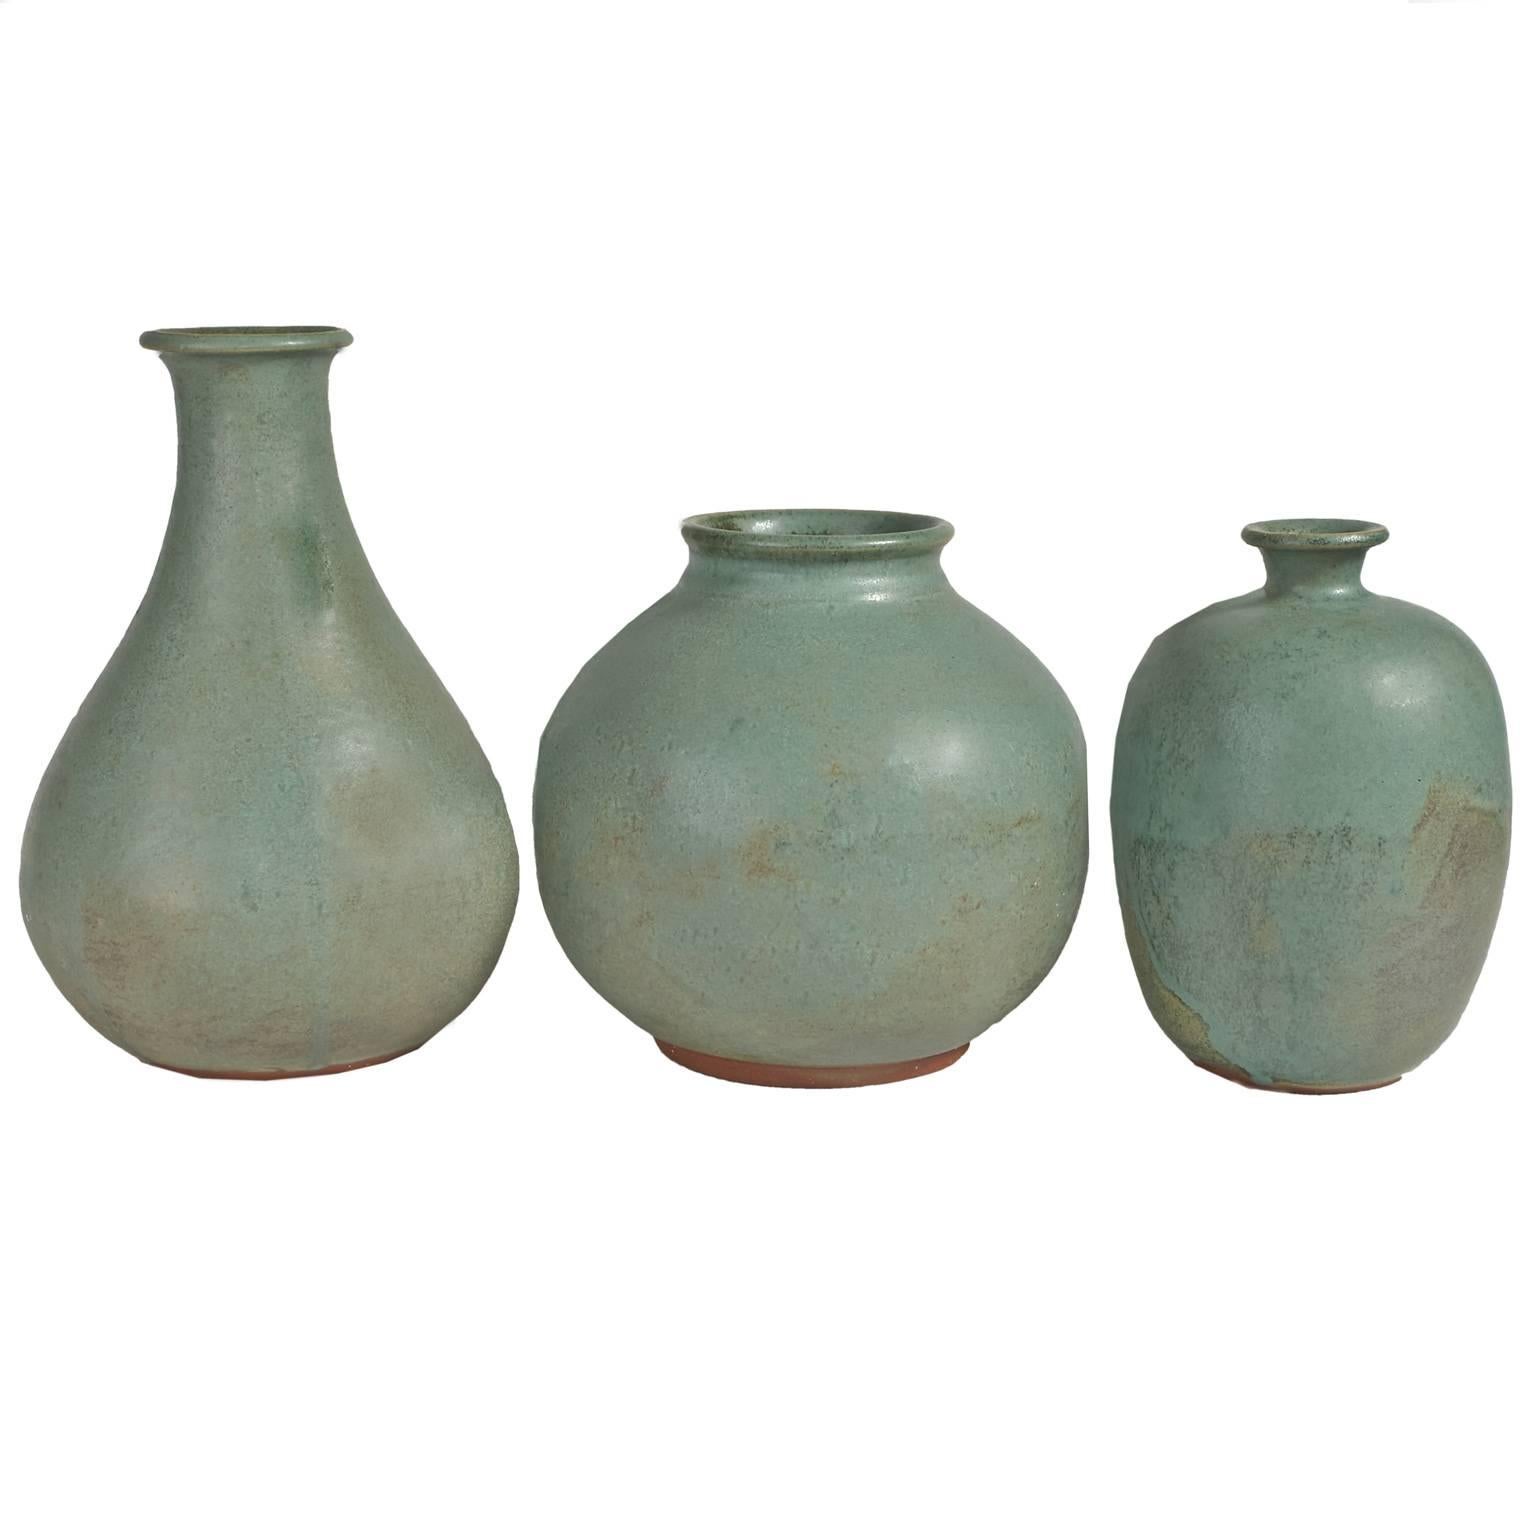 American Collection of Green Ceramic Studio Pottery